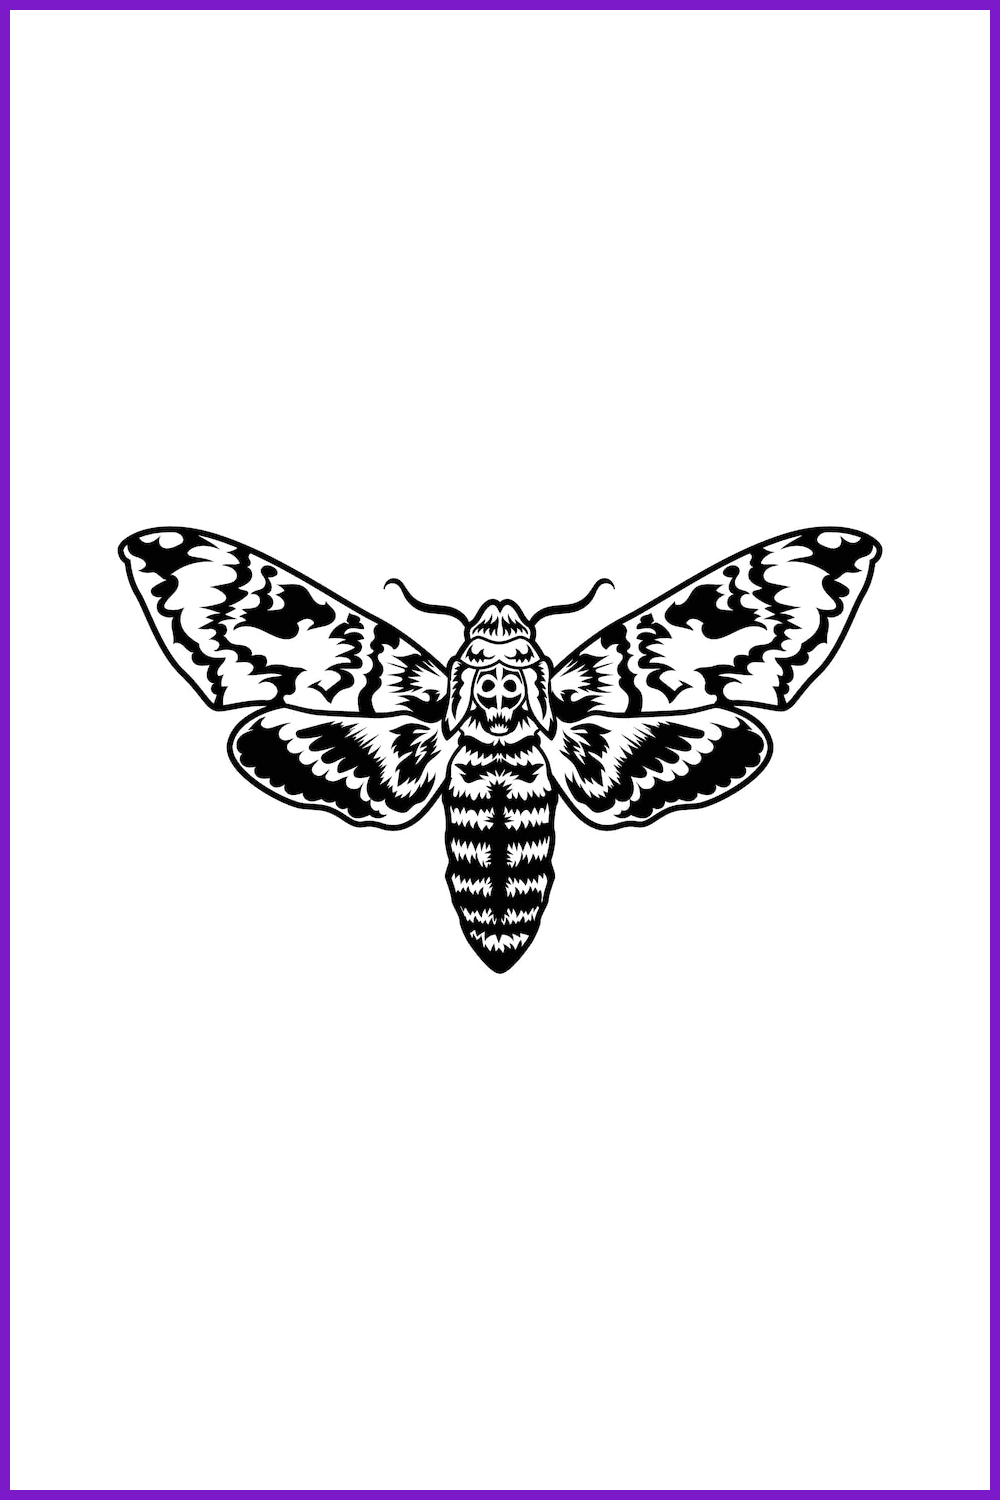 Sketch of a large black moth on a white background.